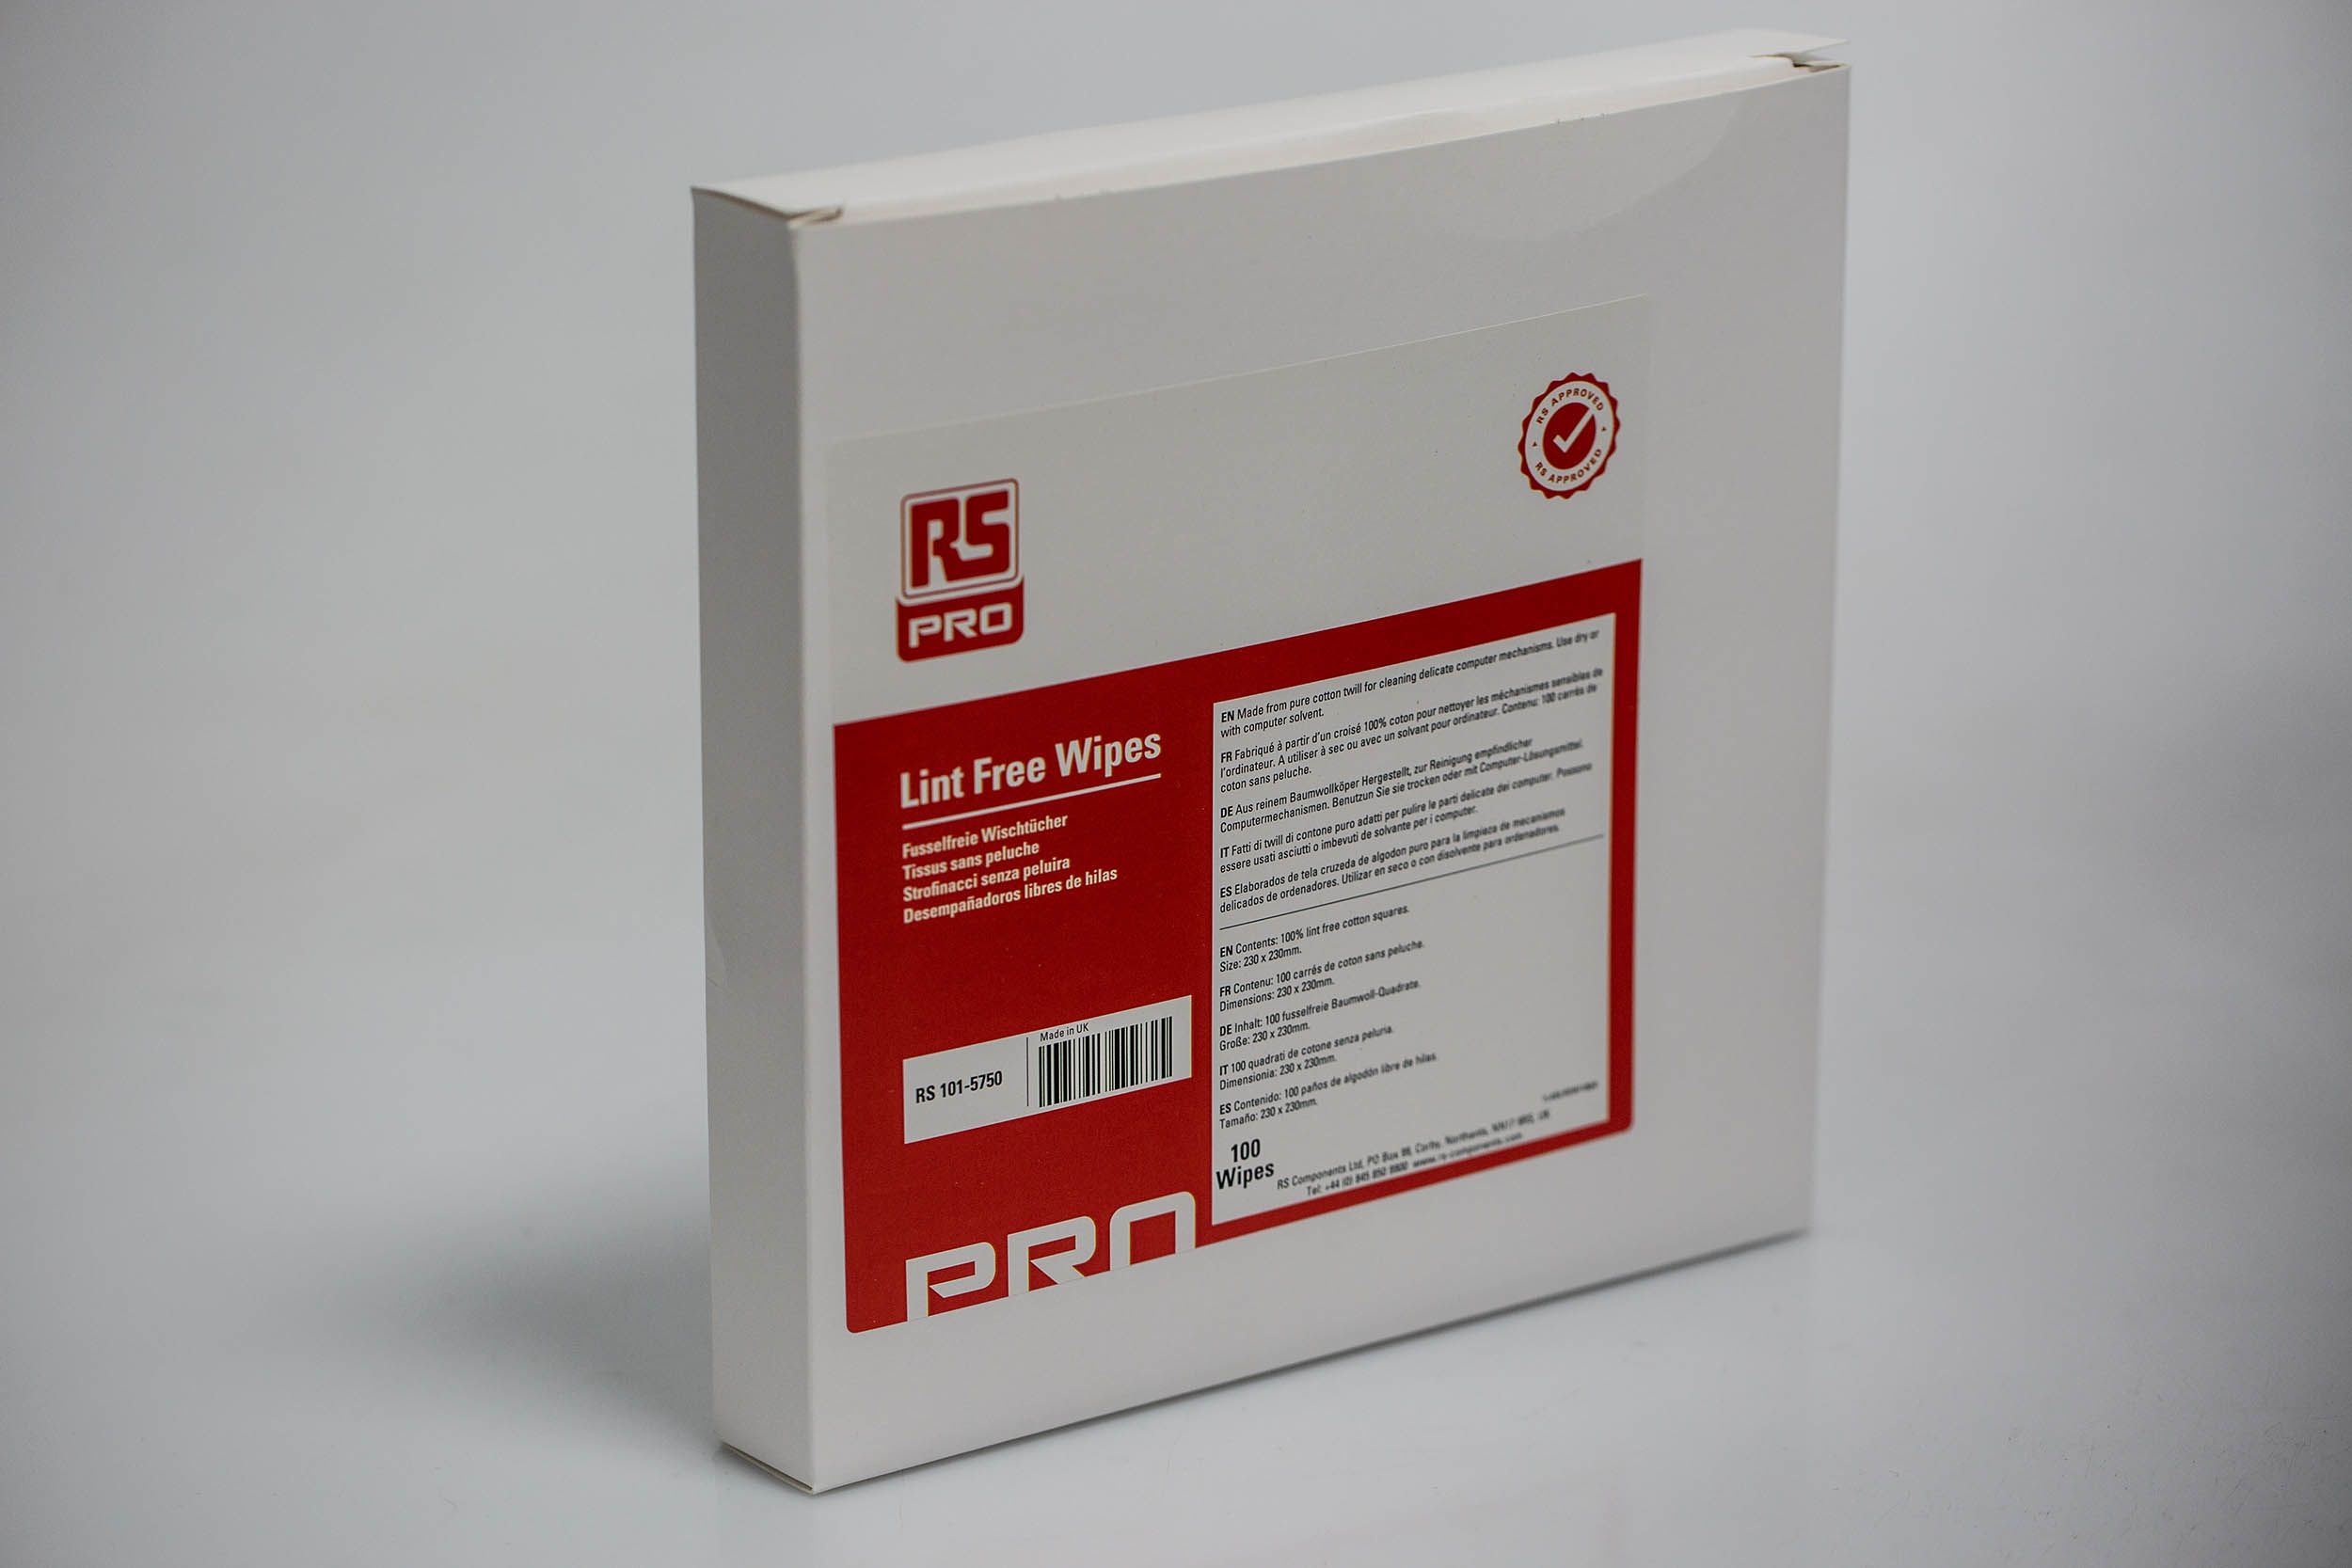 RS PRO Dry Electronics Wipes for Computer Screens, Office Equipment, Plastic, Screen Filters Use, Box of 100